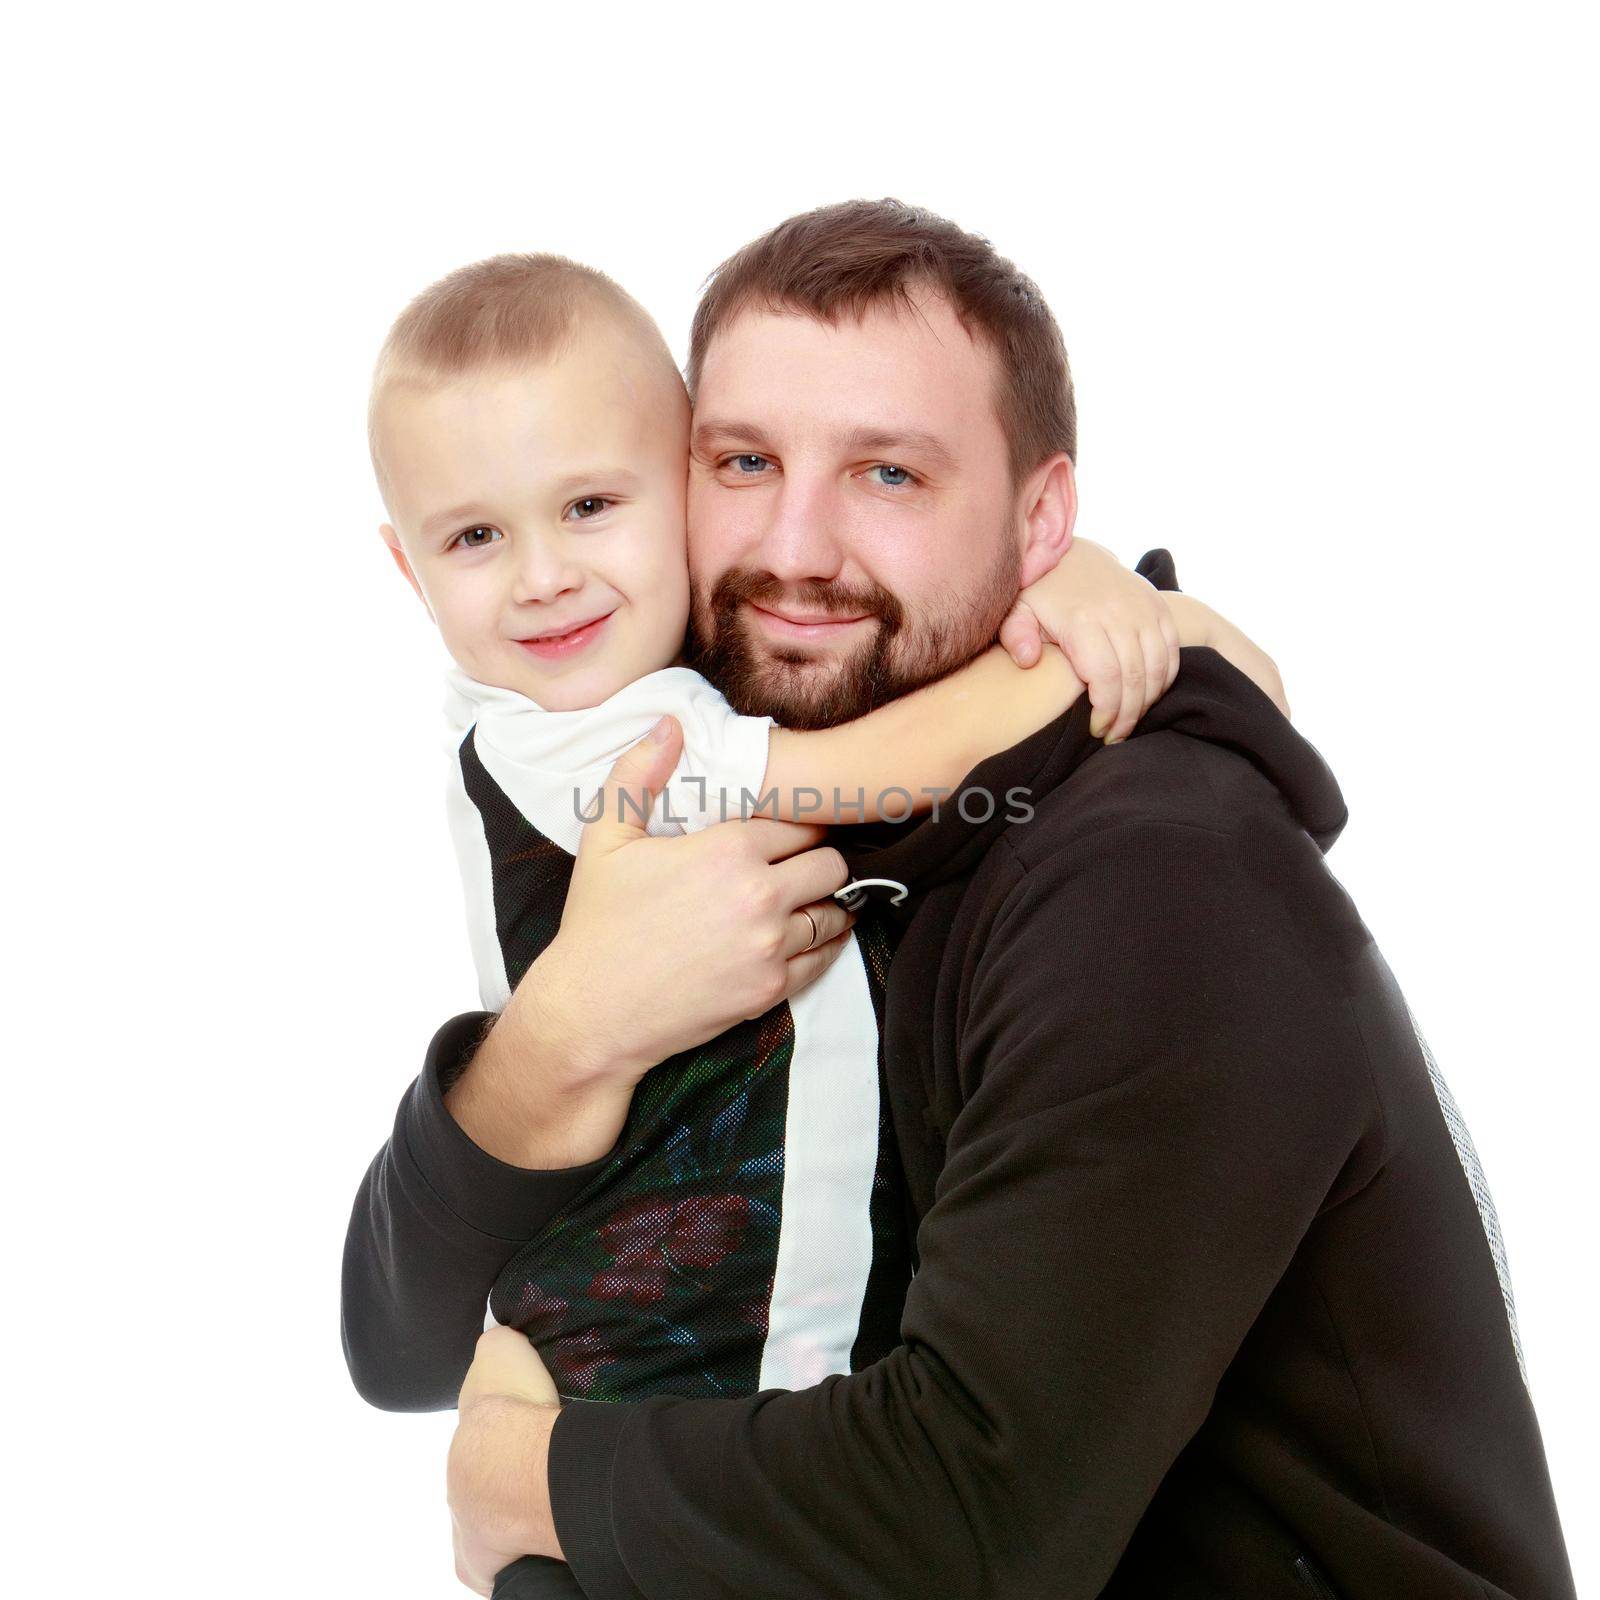 little boy who loves to play football embraces his beloved father.Isolated on white background.